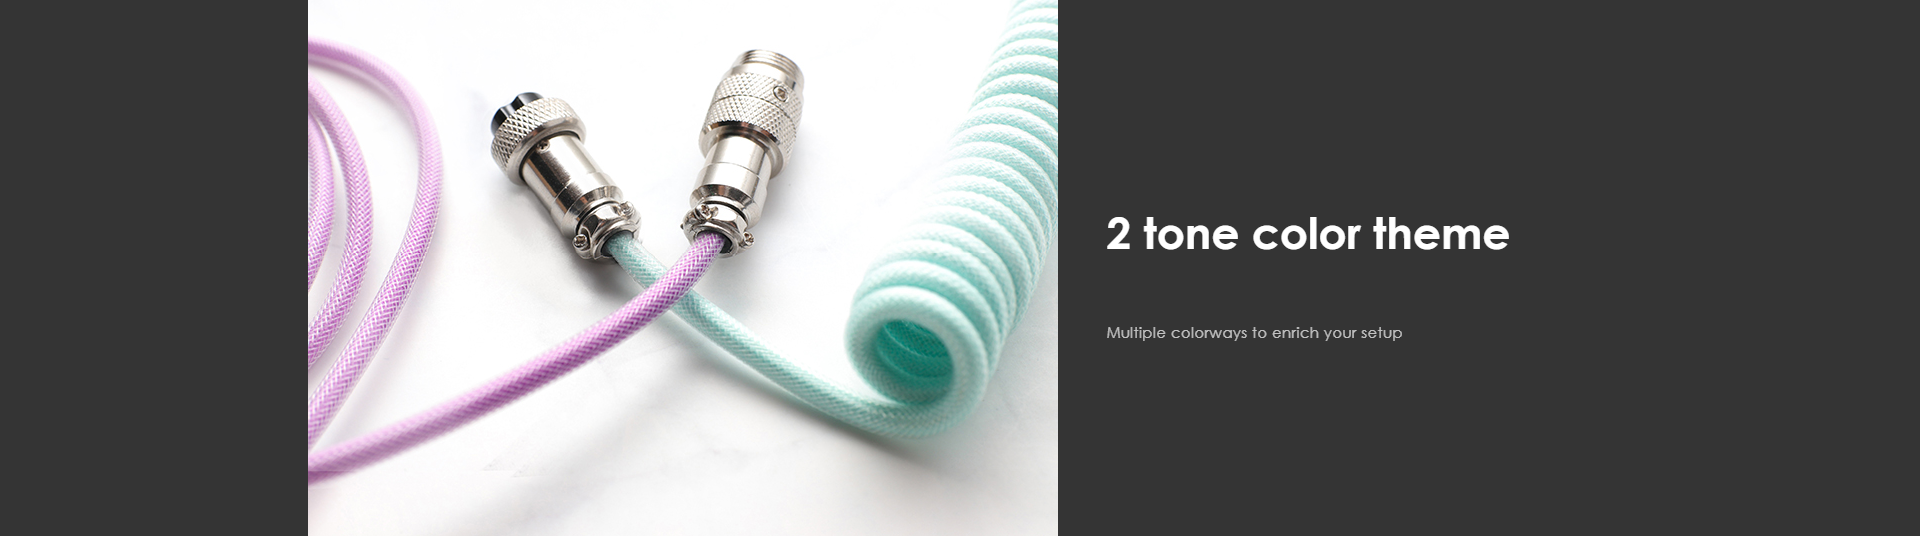 How to Make a Coiled Cable (Quick & Easy) 